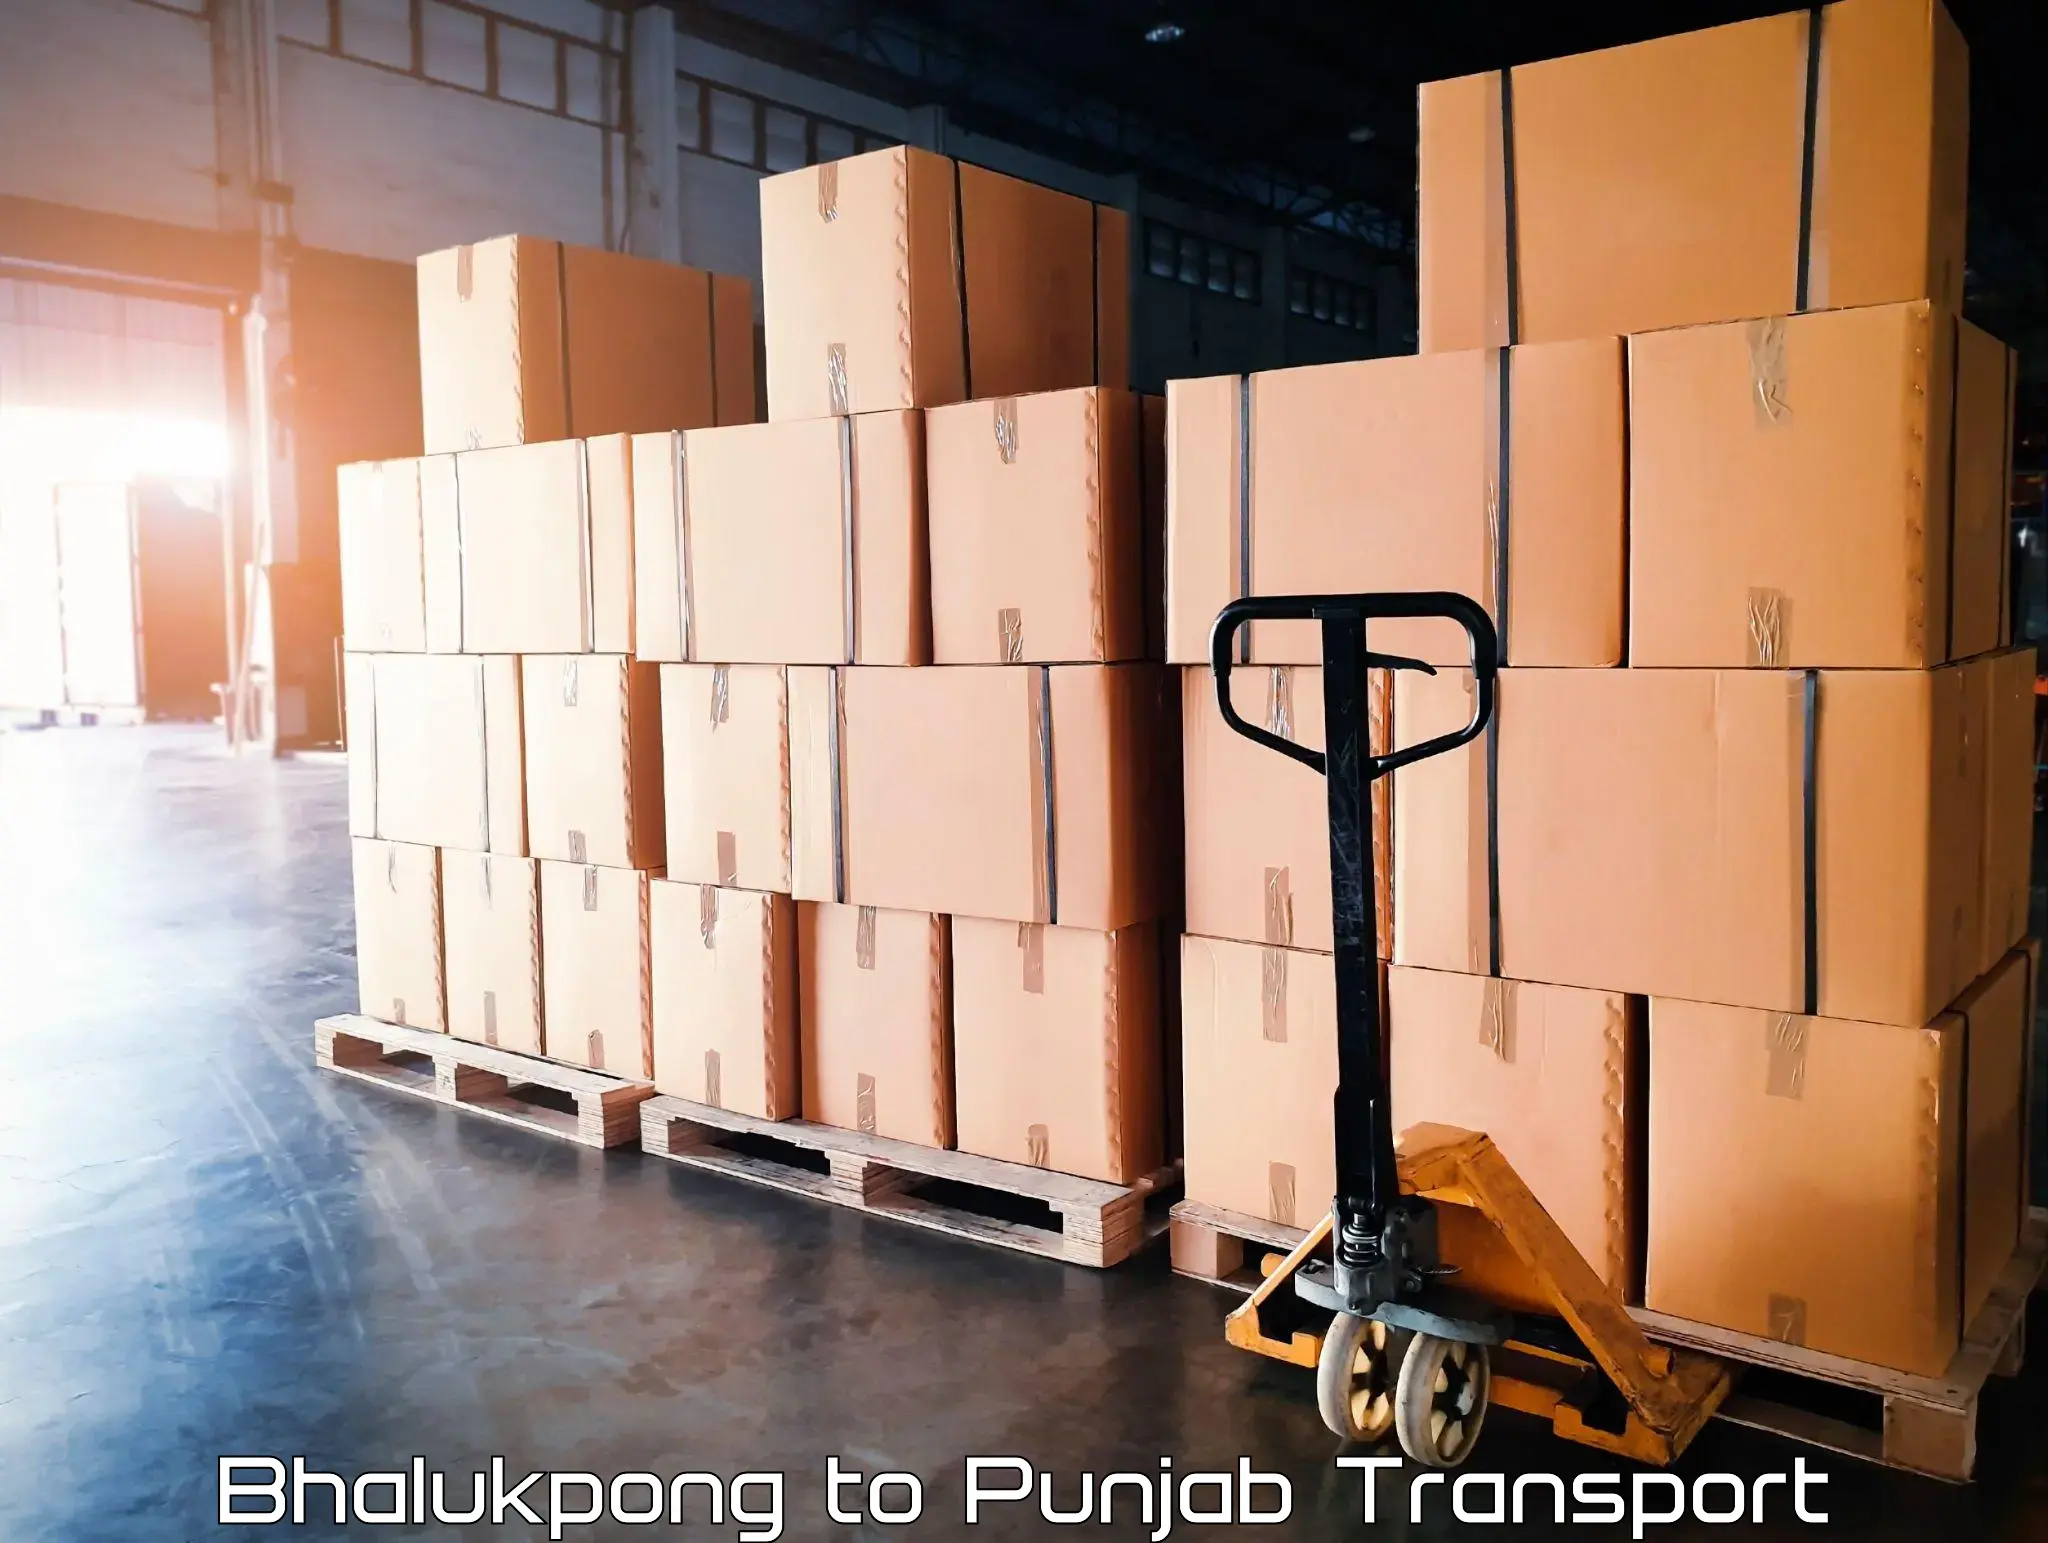 Transport shared services in Bhalukpong to Jalandhar